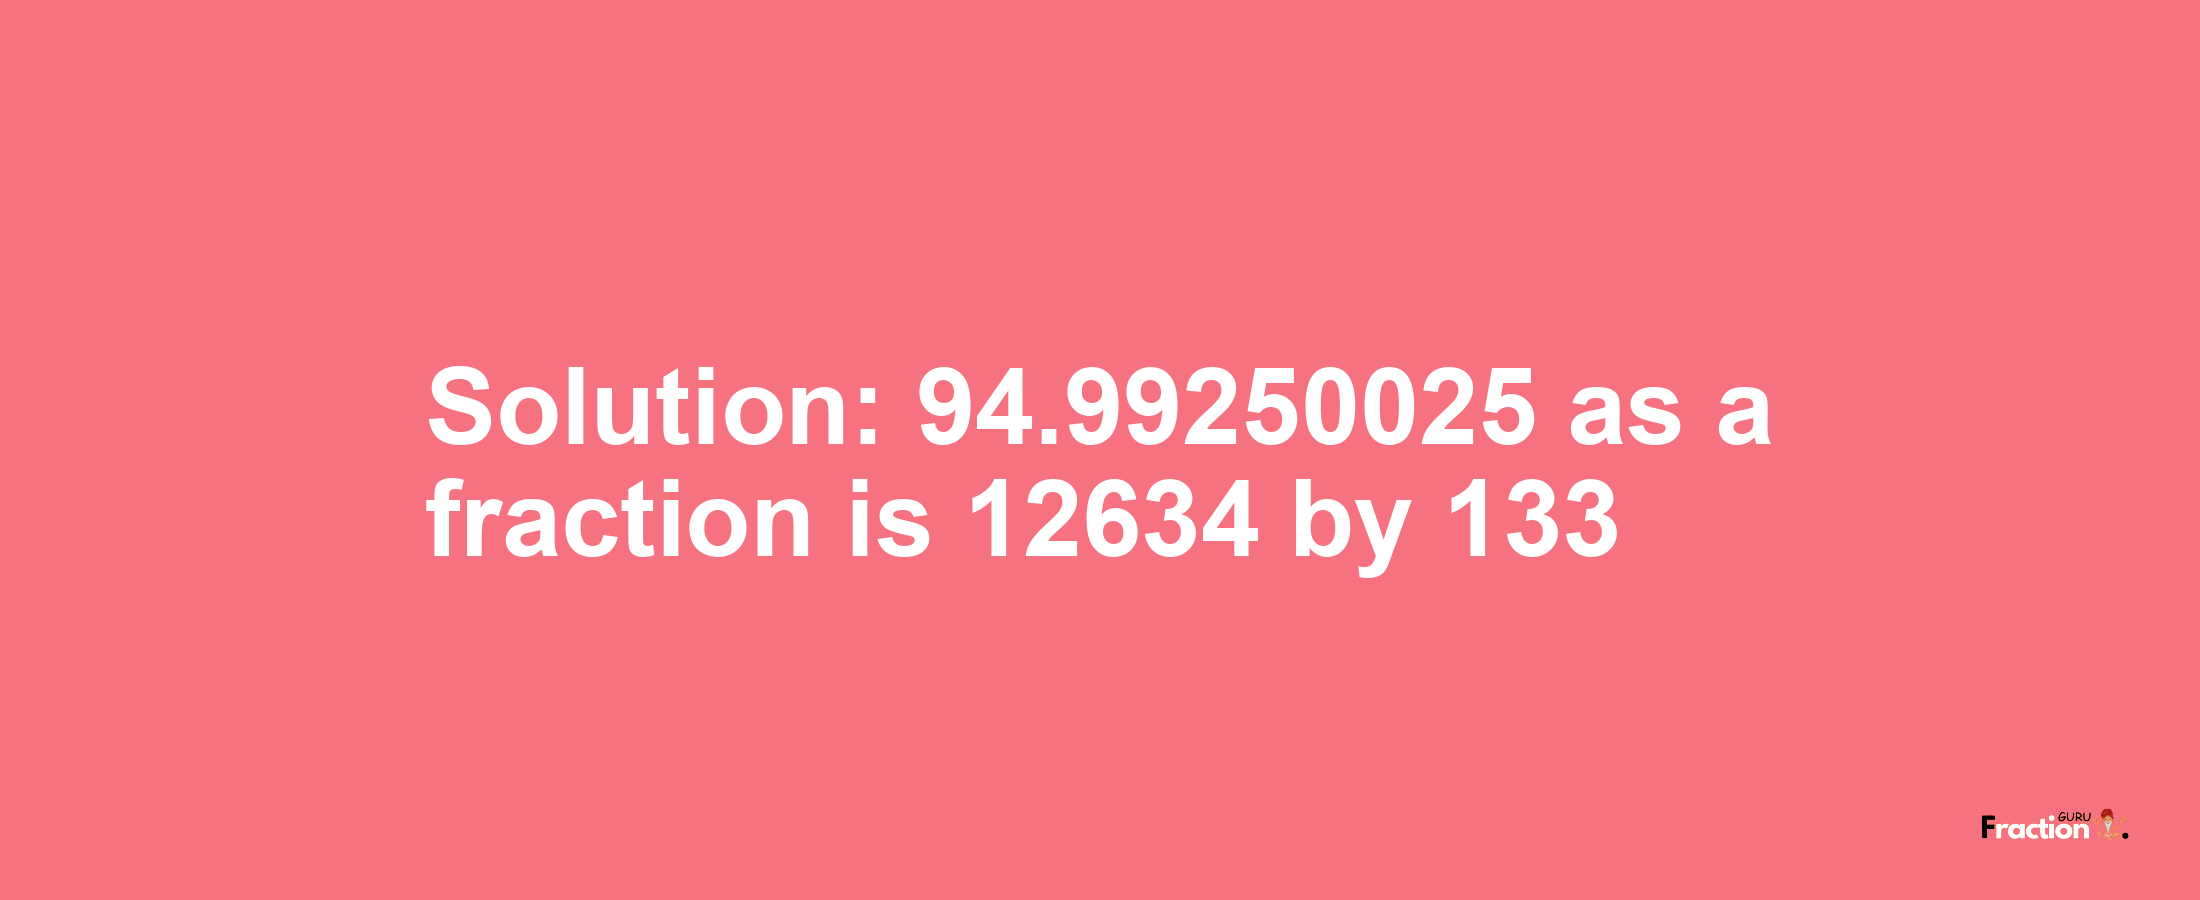 Solution:94.99250025 as a fraction is 12634/133